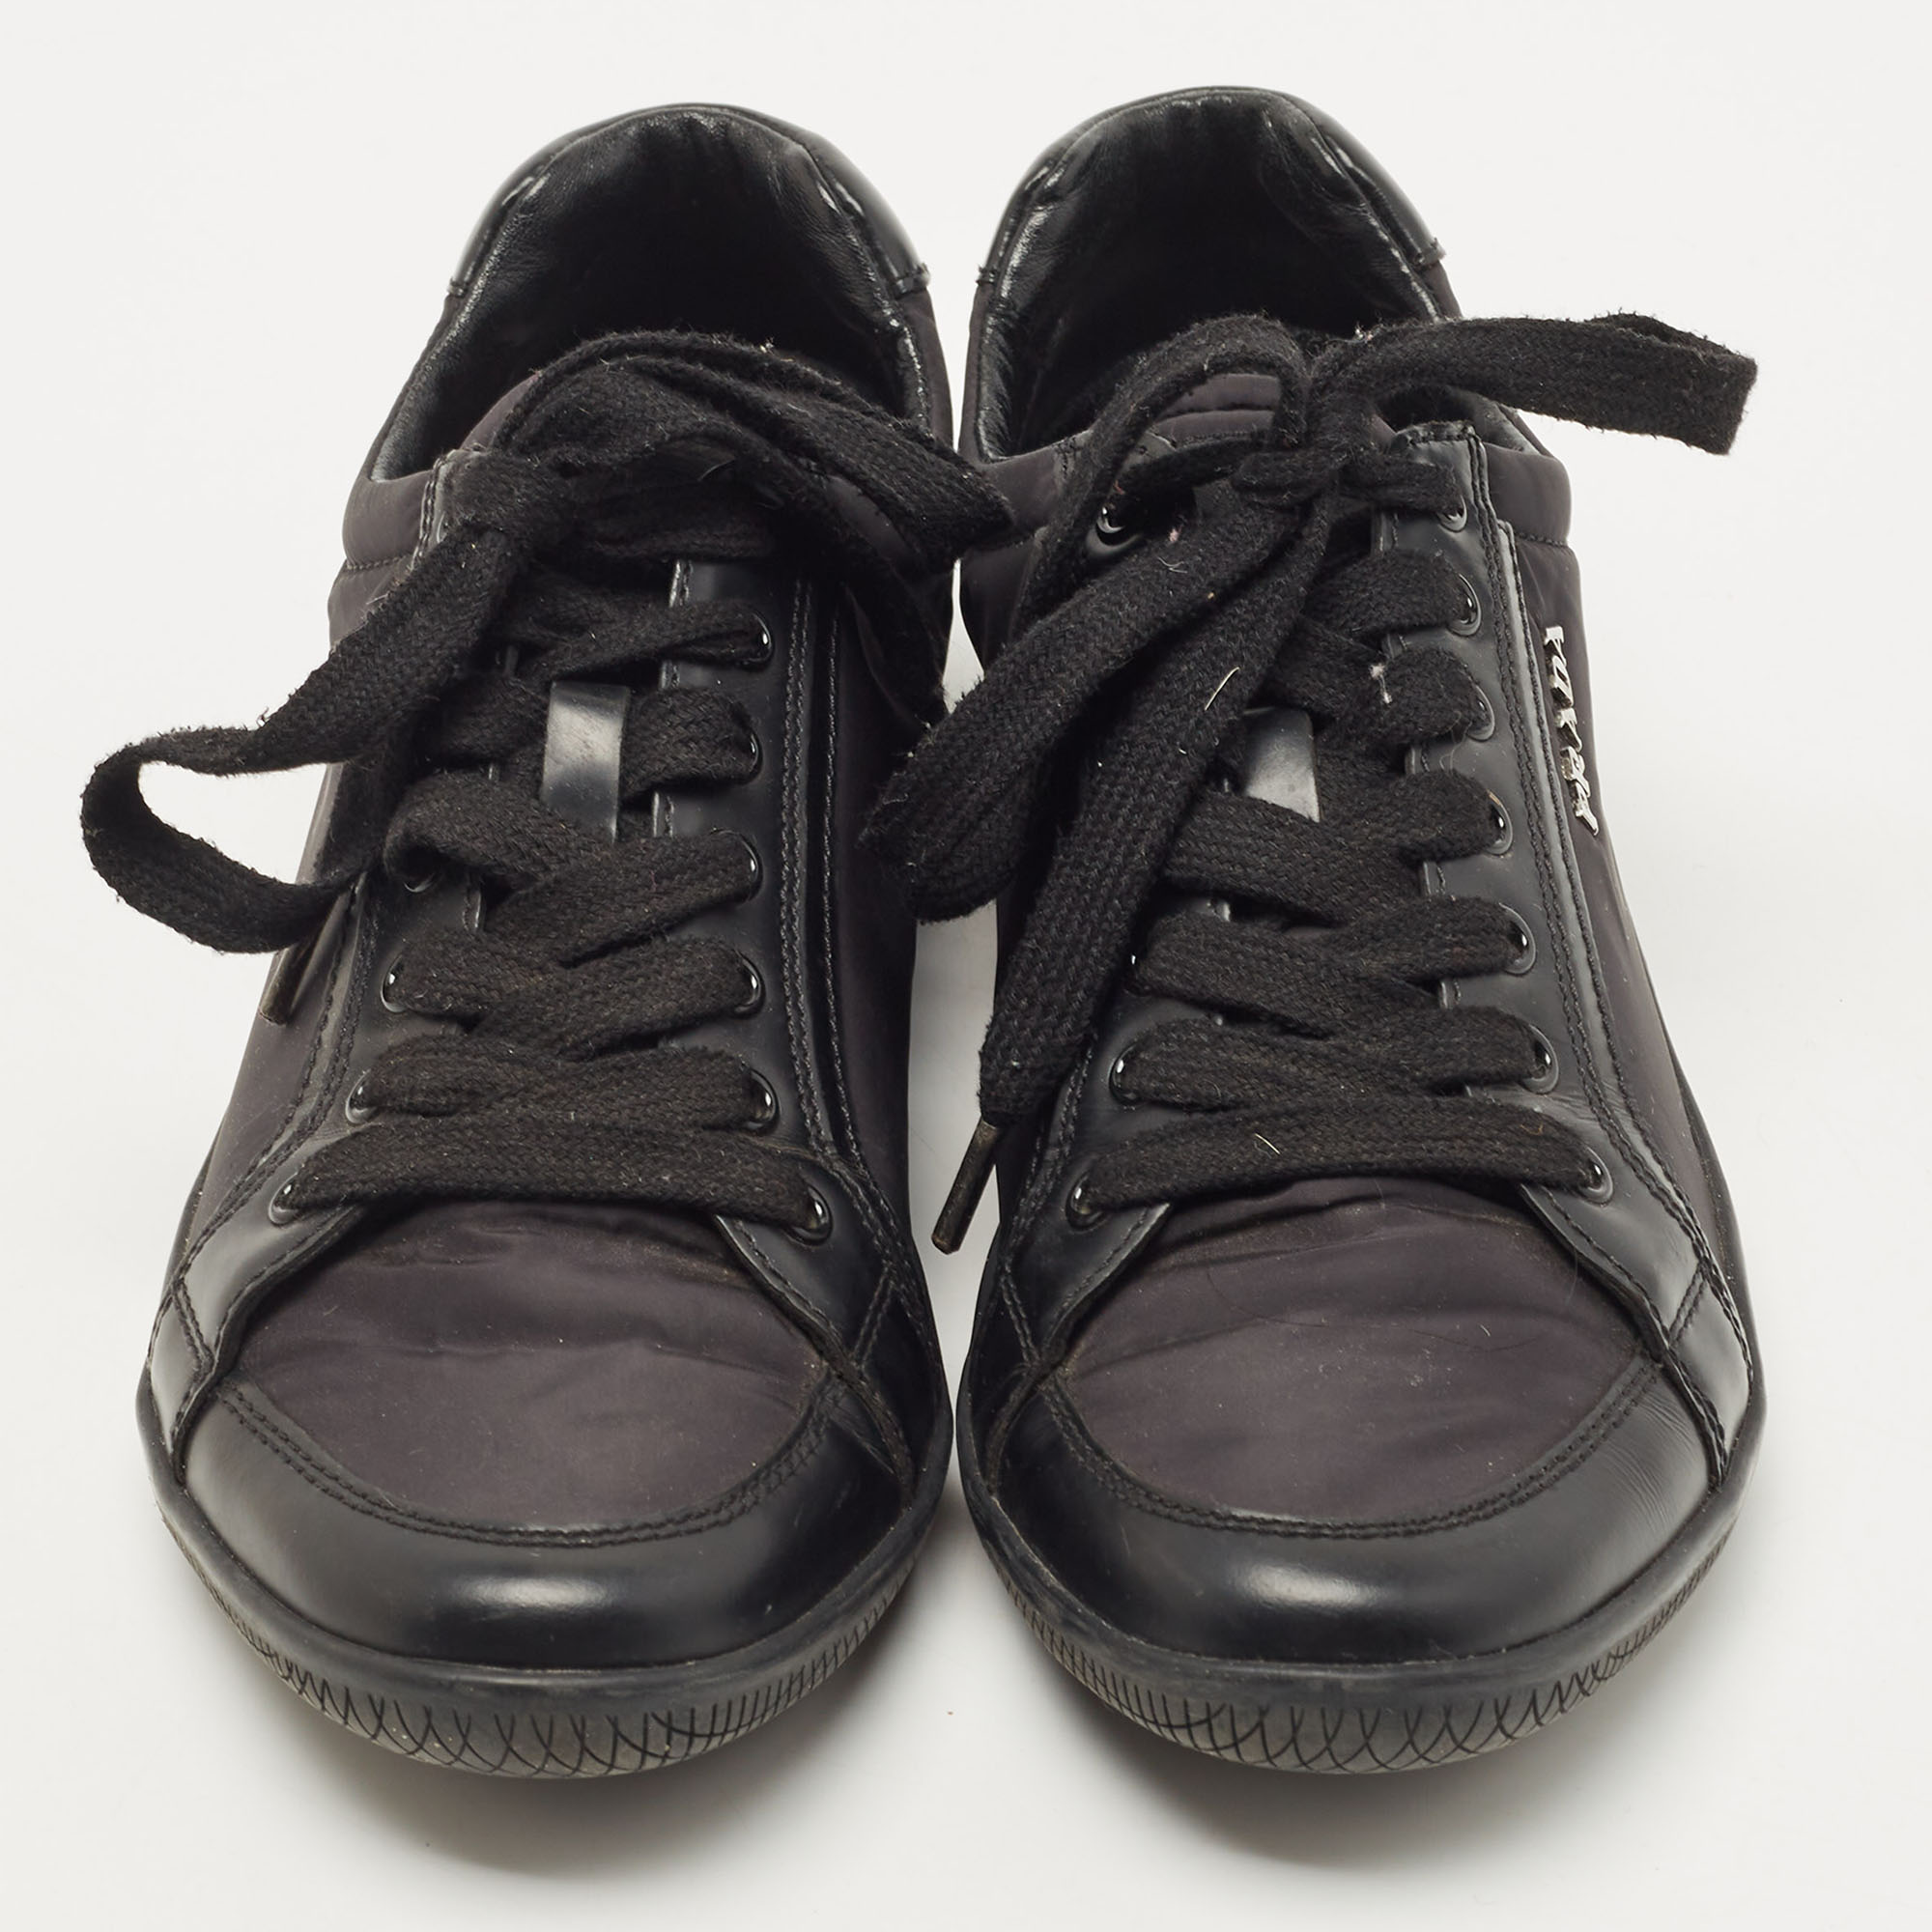 Prada Sport Black Nylon Fabric And Leather Low Top Sneakers Size 37.5